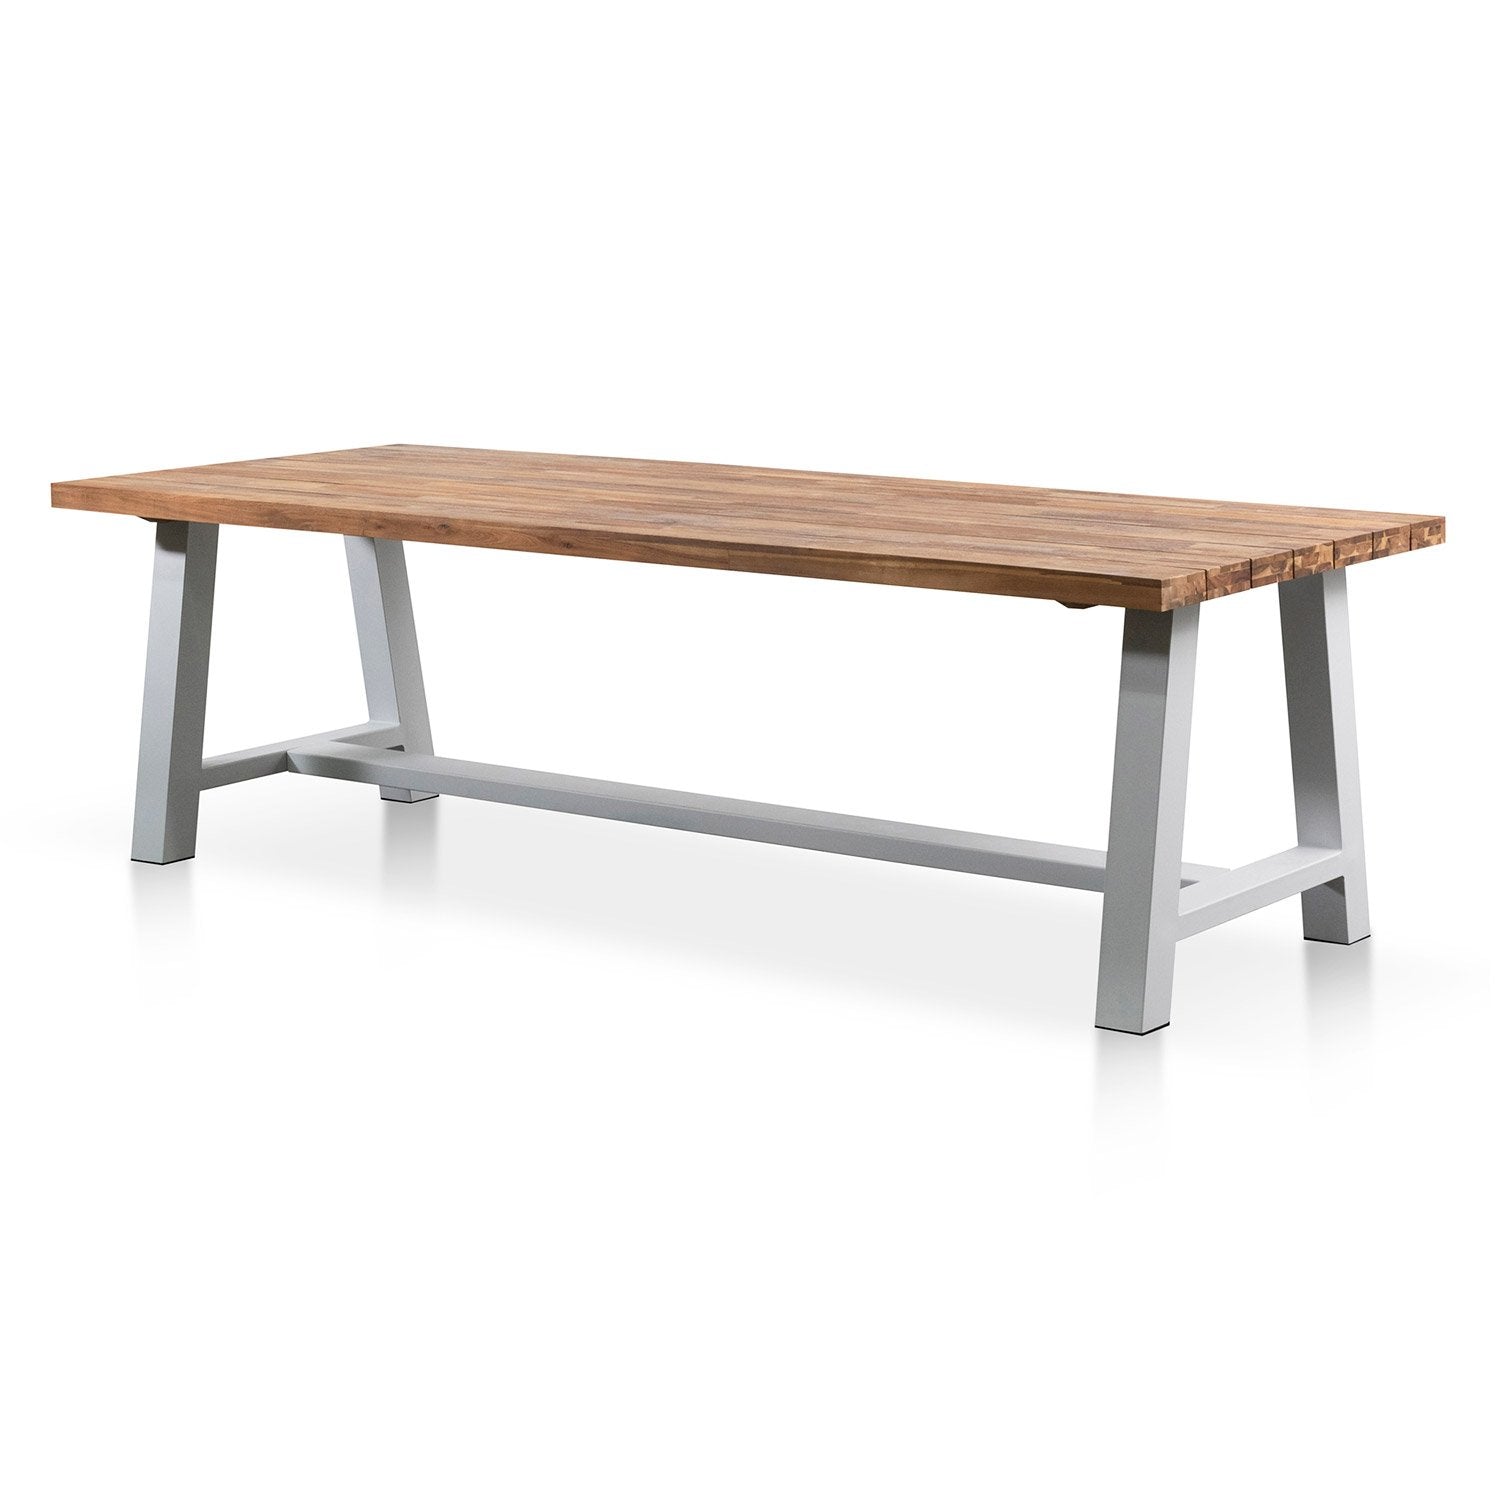 Nemo 2.5m Outdoor Dining Table - Natural Top and White Base - Dining Tables